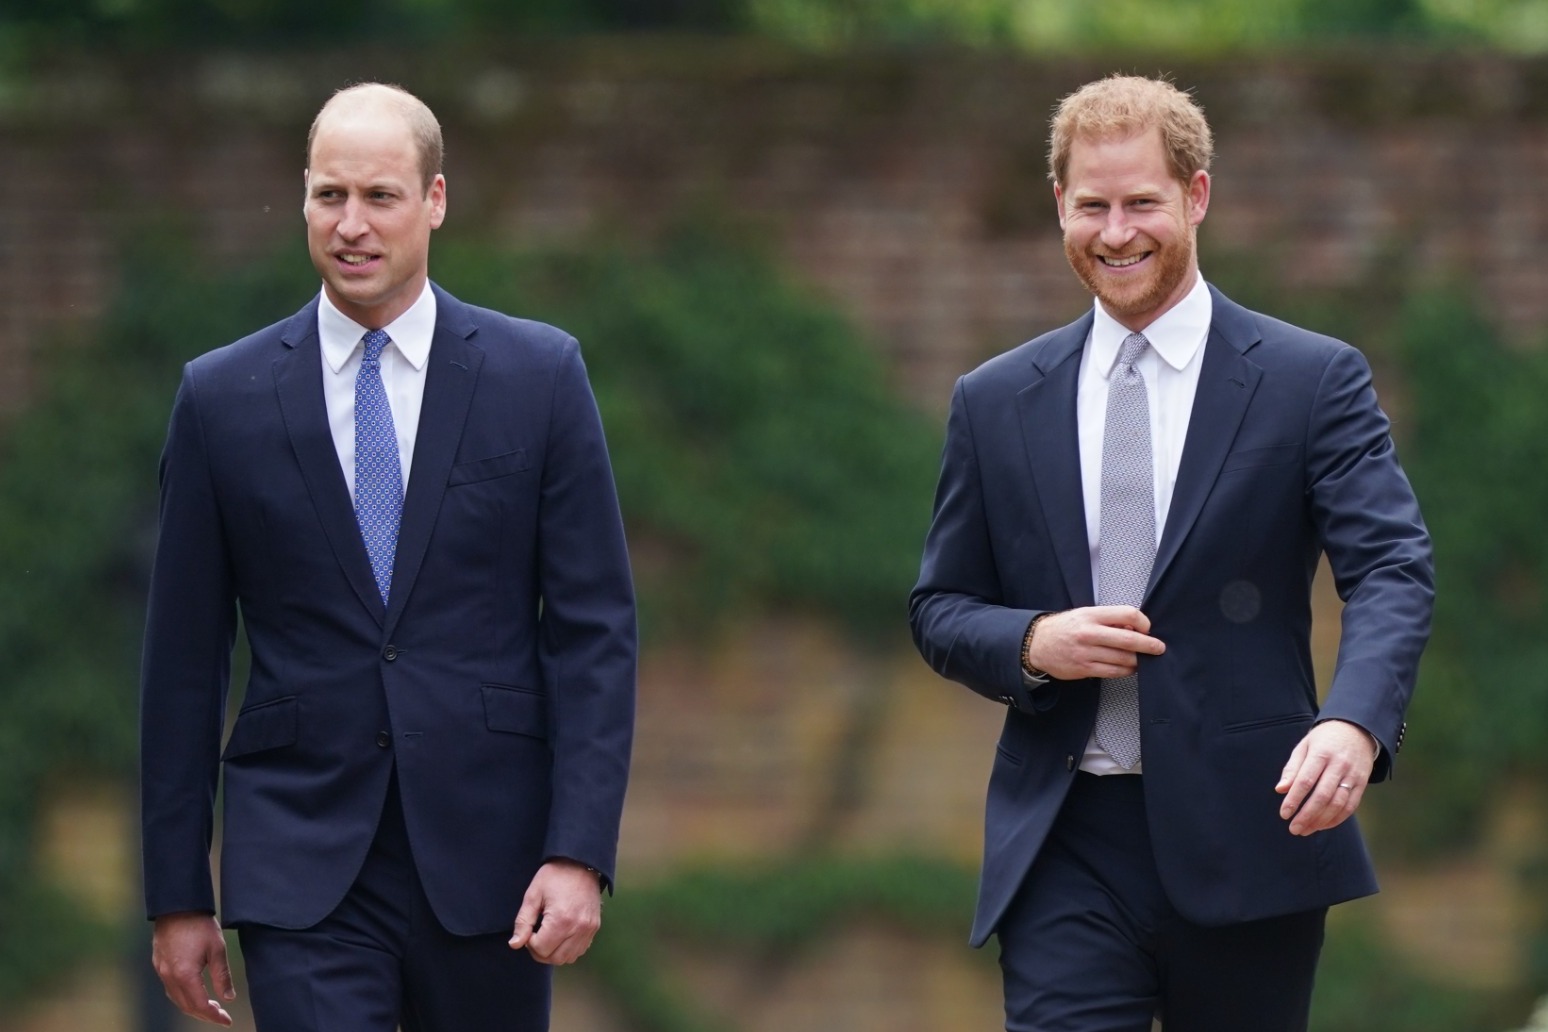 Harry calls William ‘arch nemesis’ and claims prince physically attacked him 